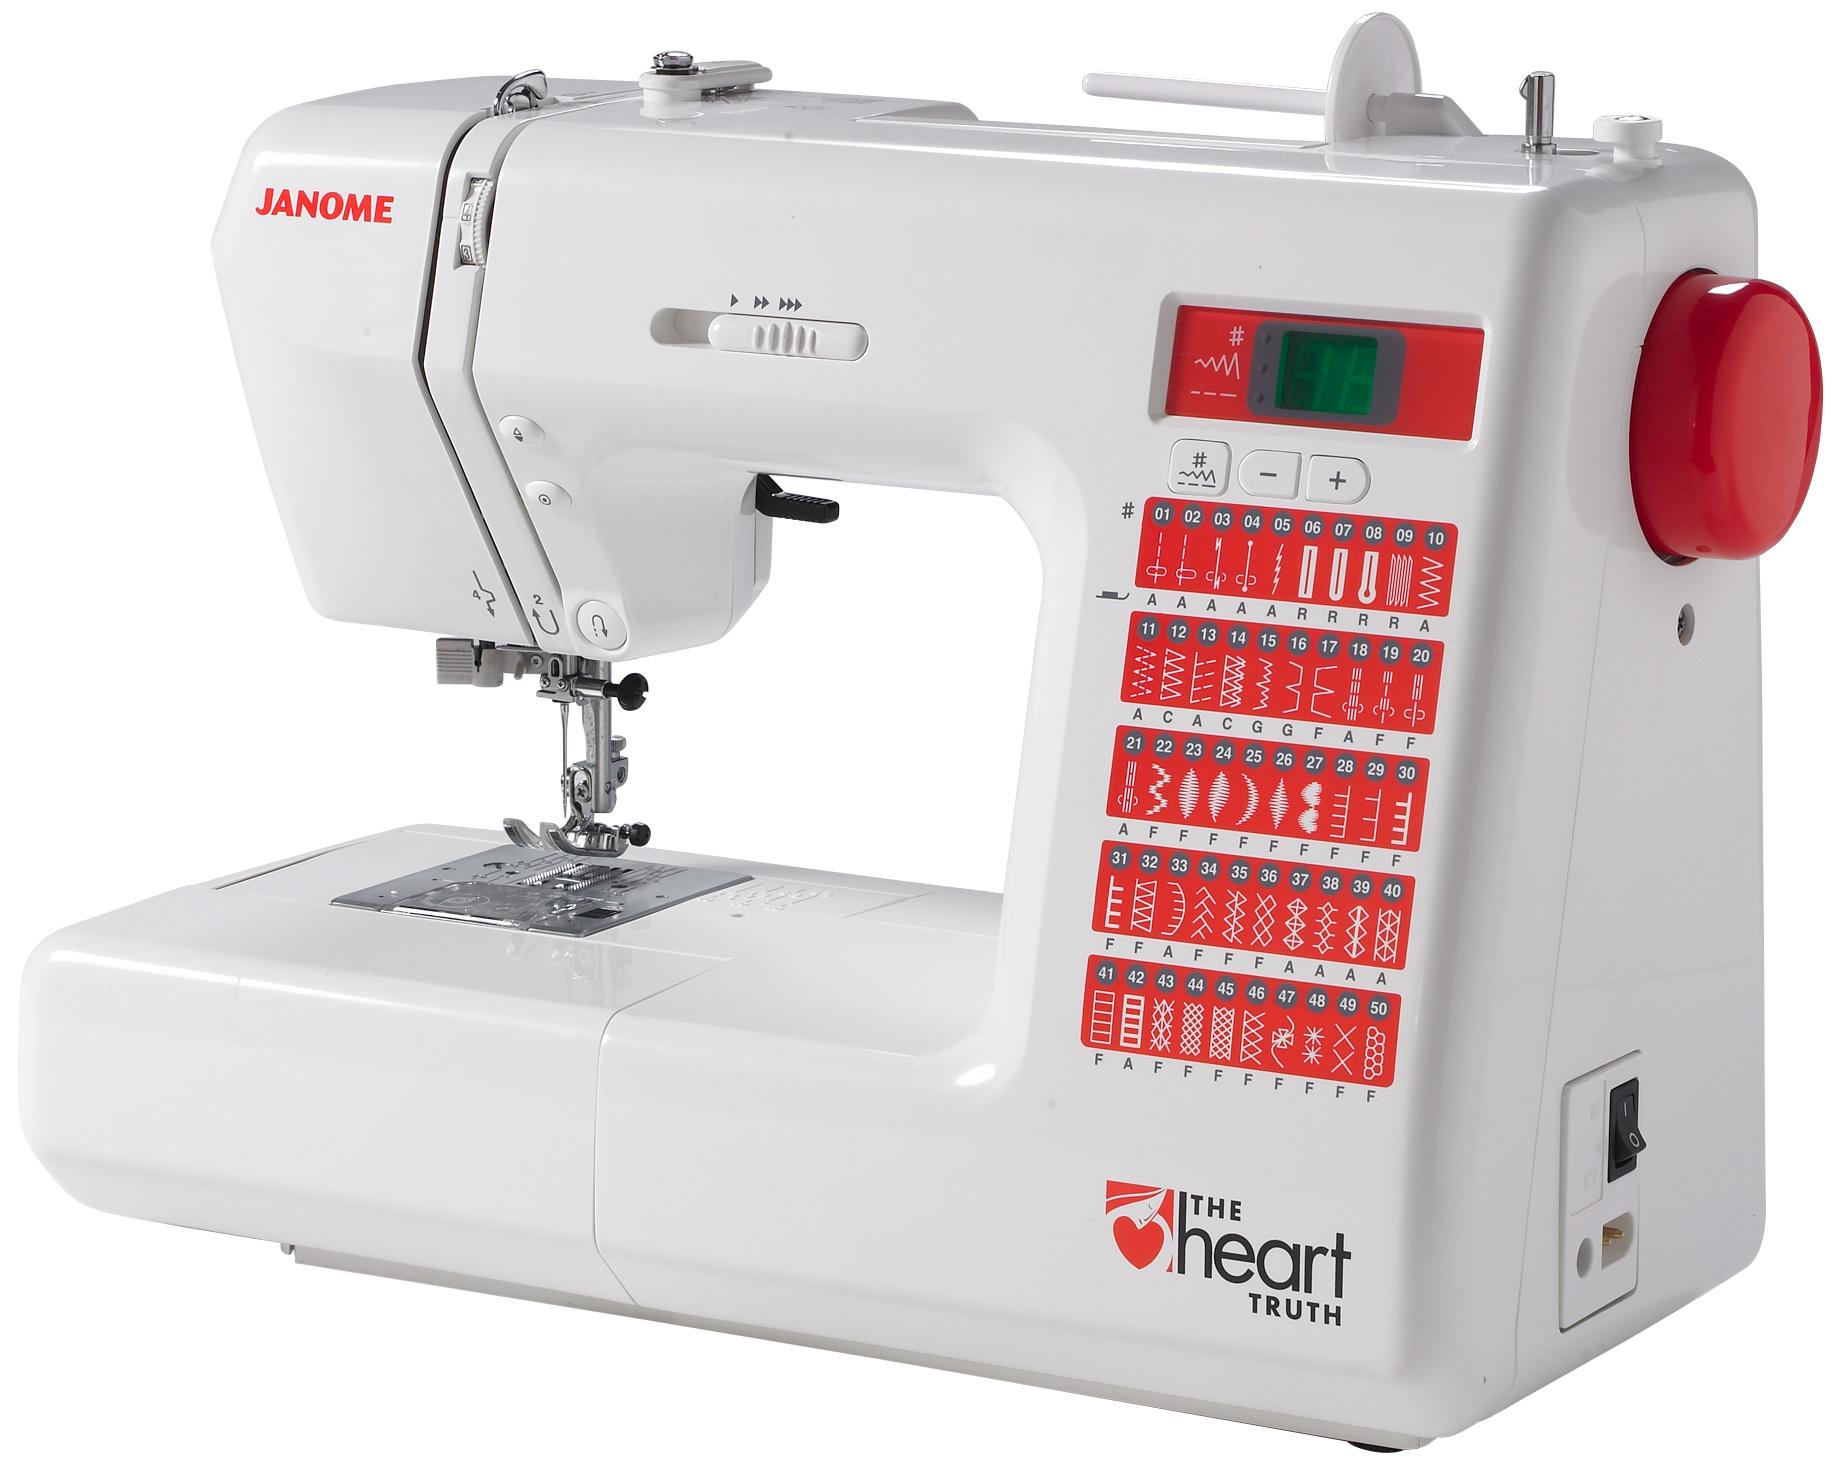 Janome Heart Truth Electronic HT2008